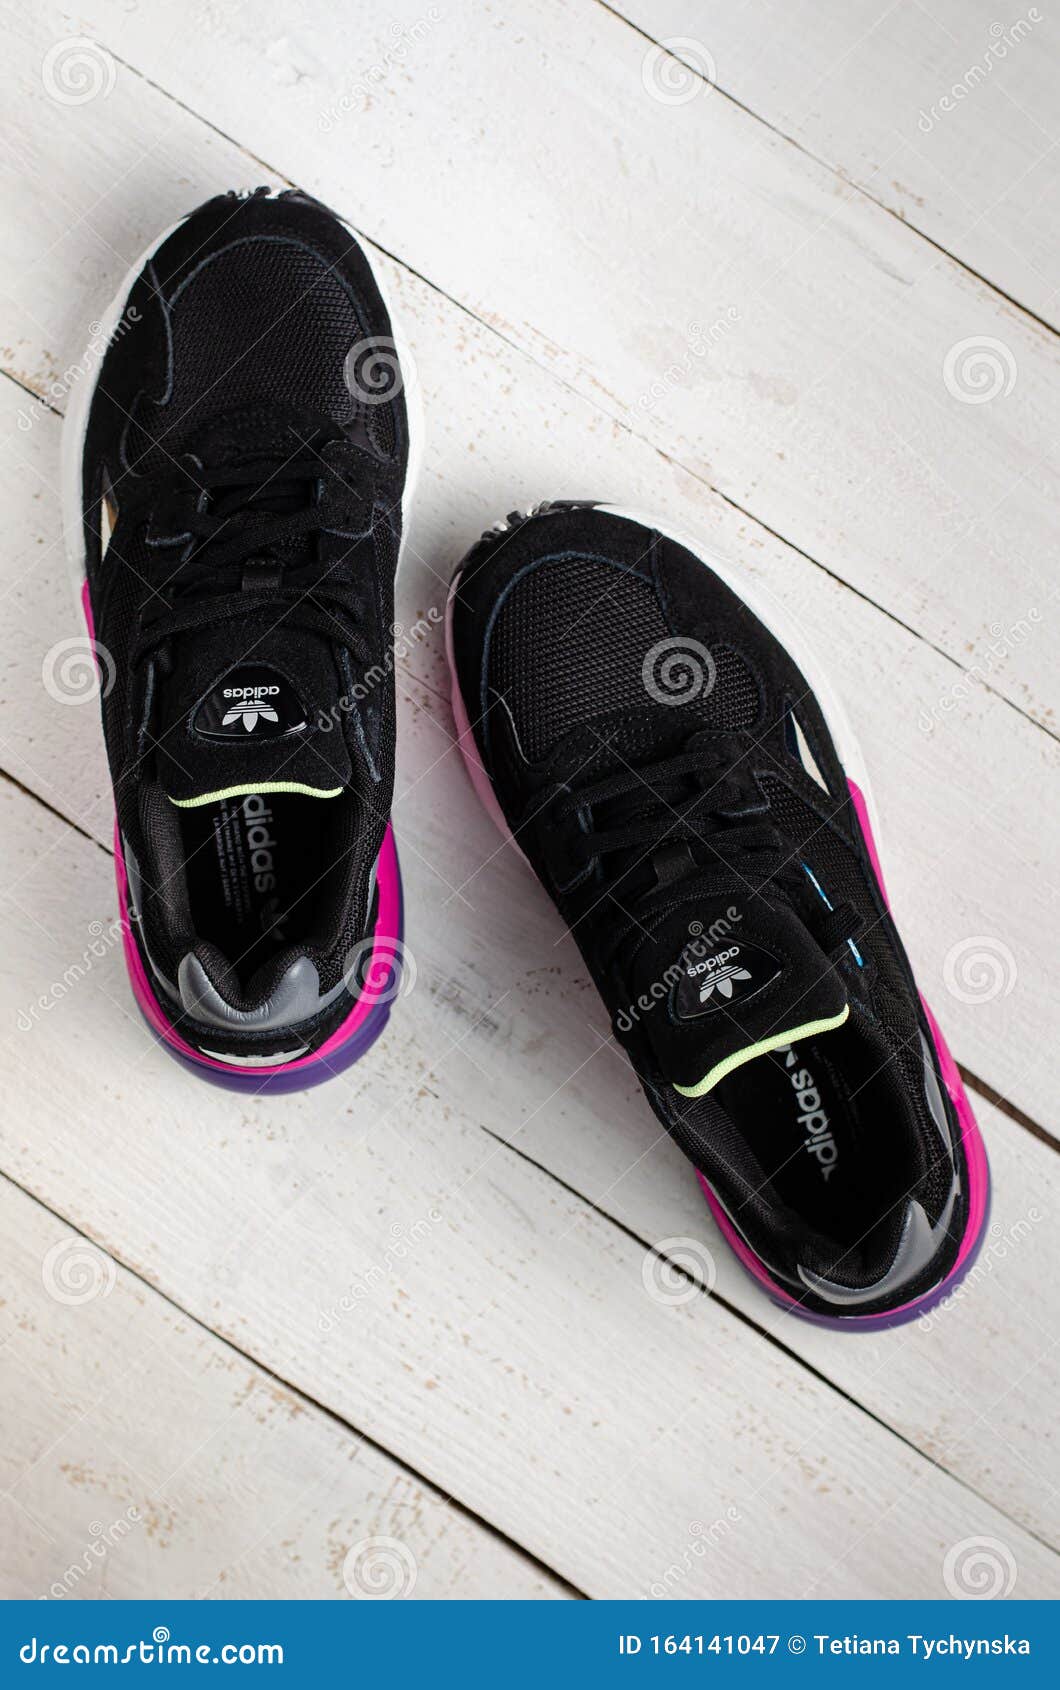 adidas trendy shoes 2019